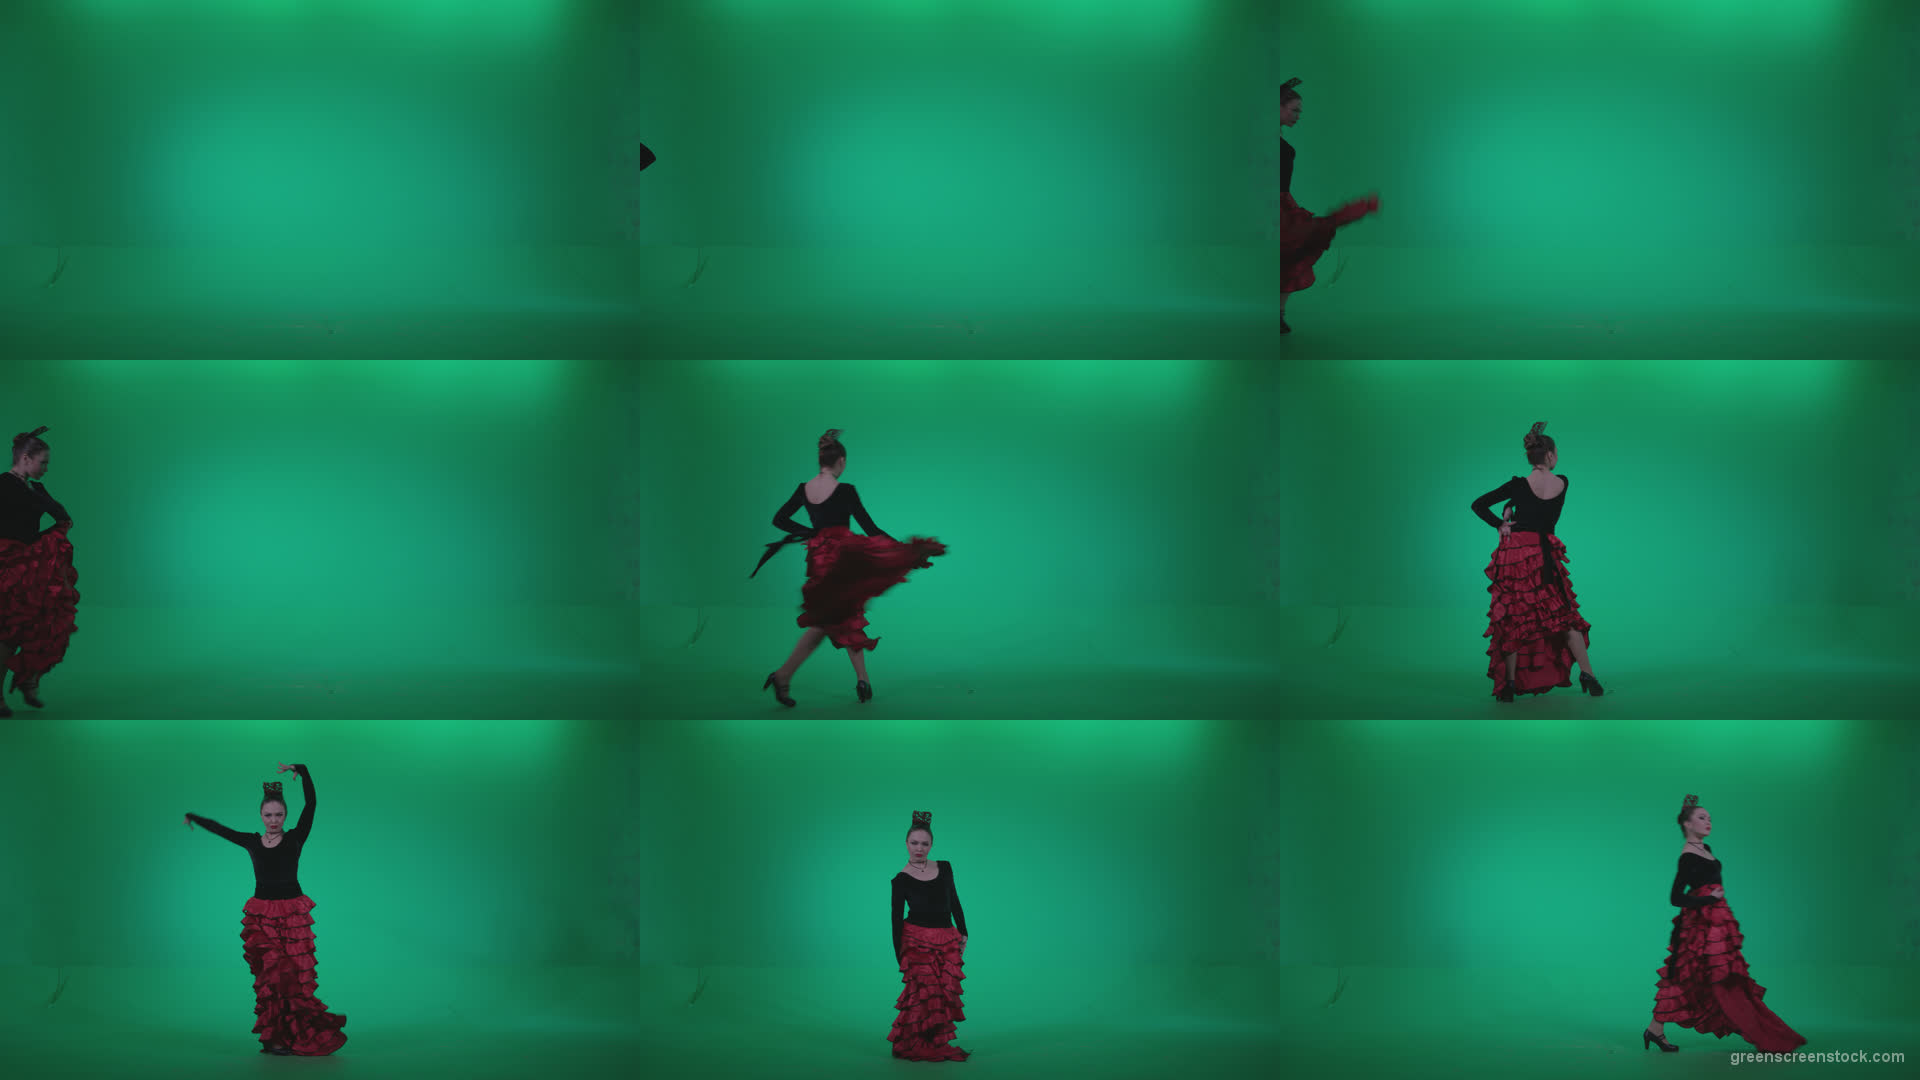 Flamenco-Red-and-Black-Dress-rb7-Green-Screen-Video-Footage-1 Green Screen Stock